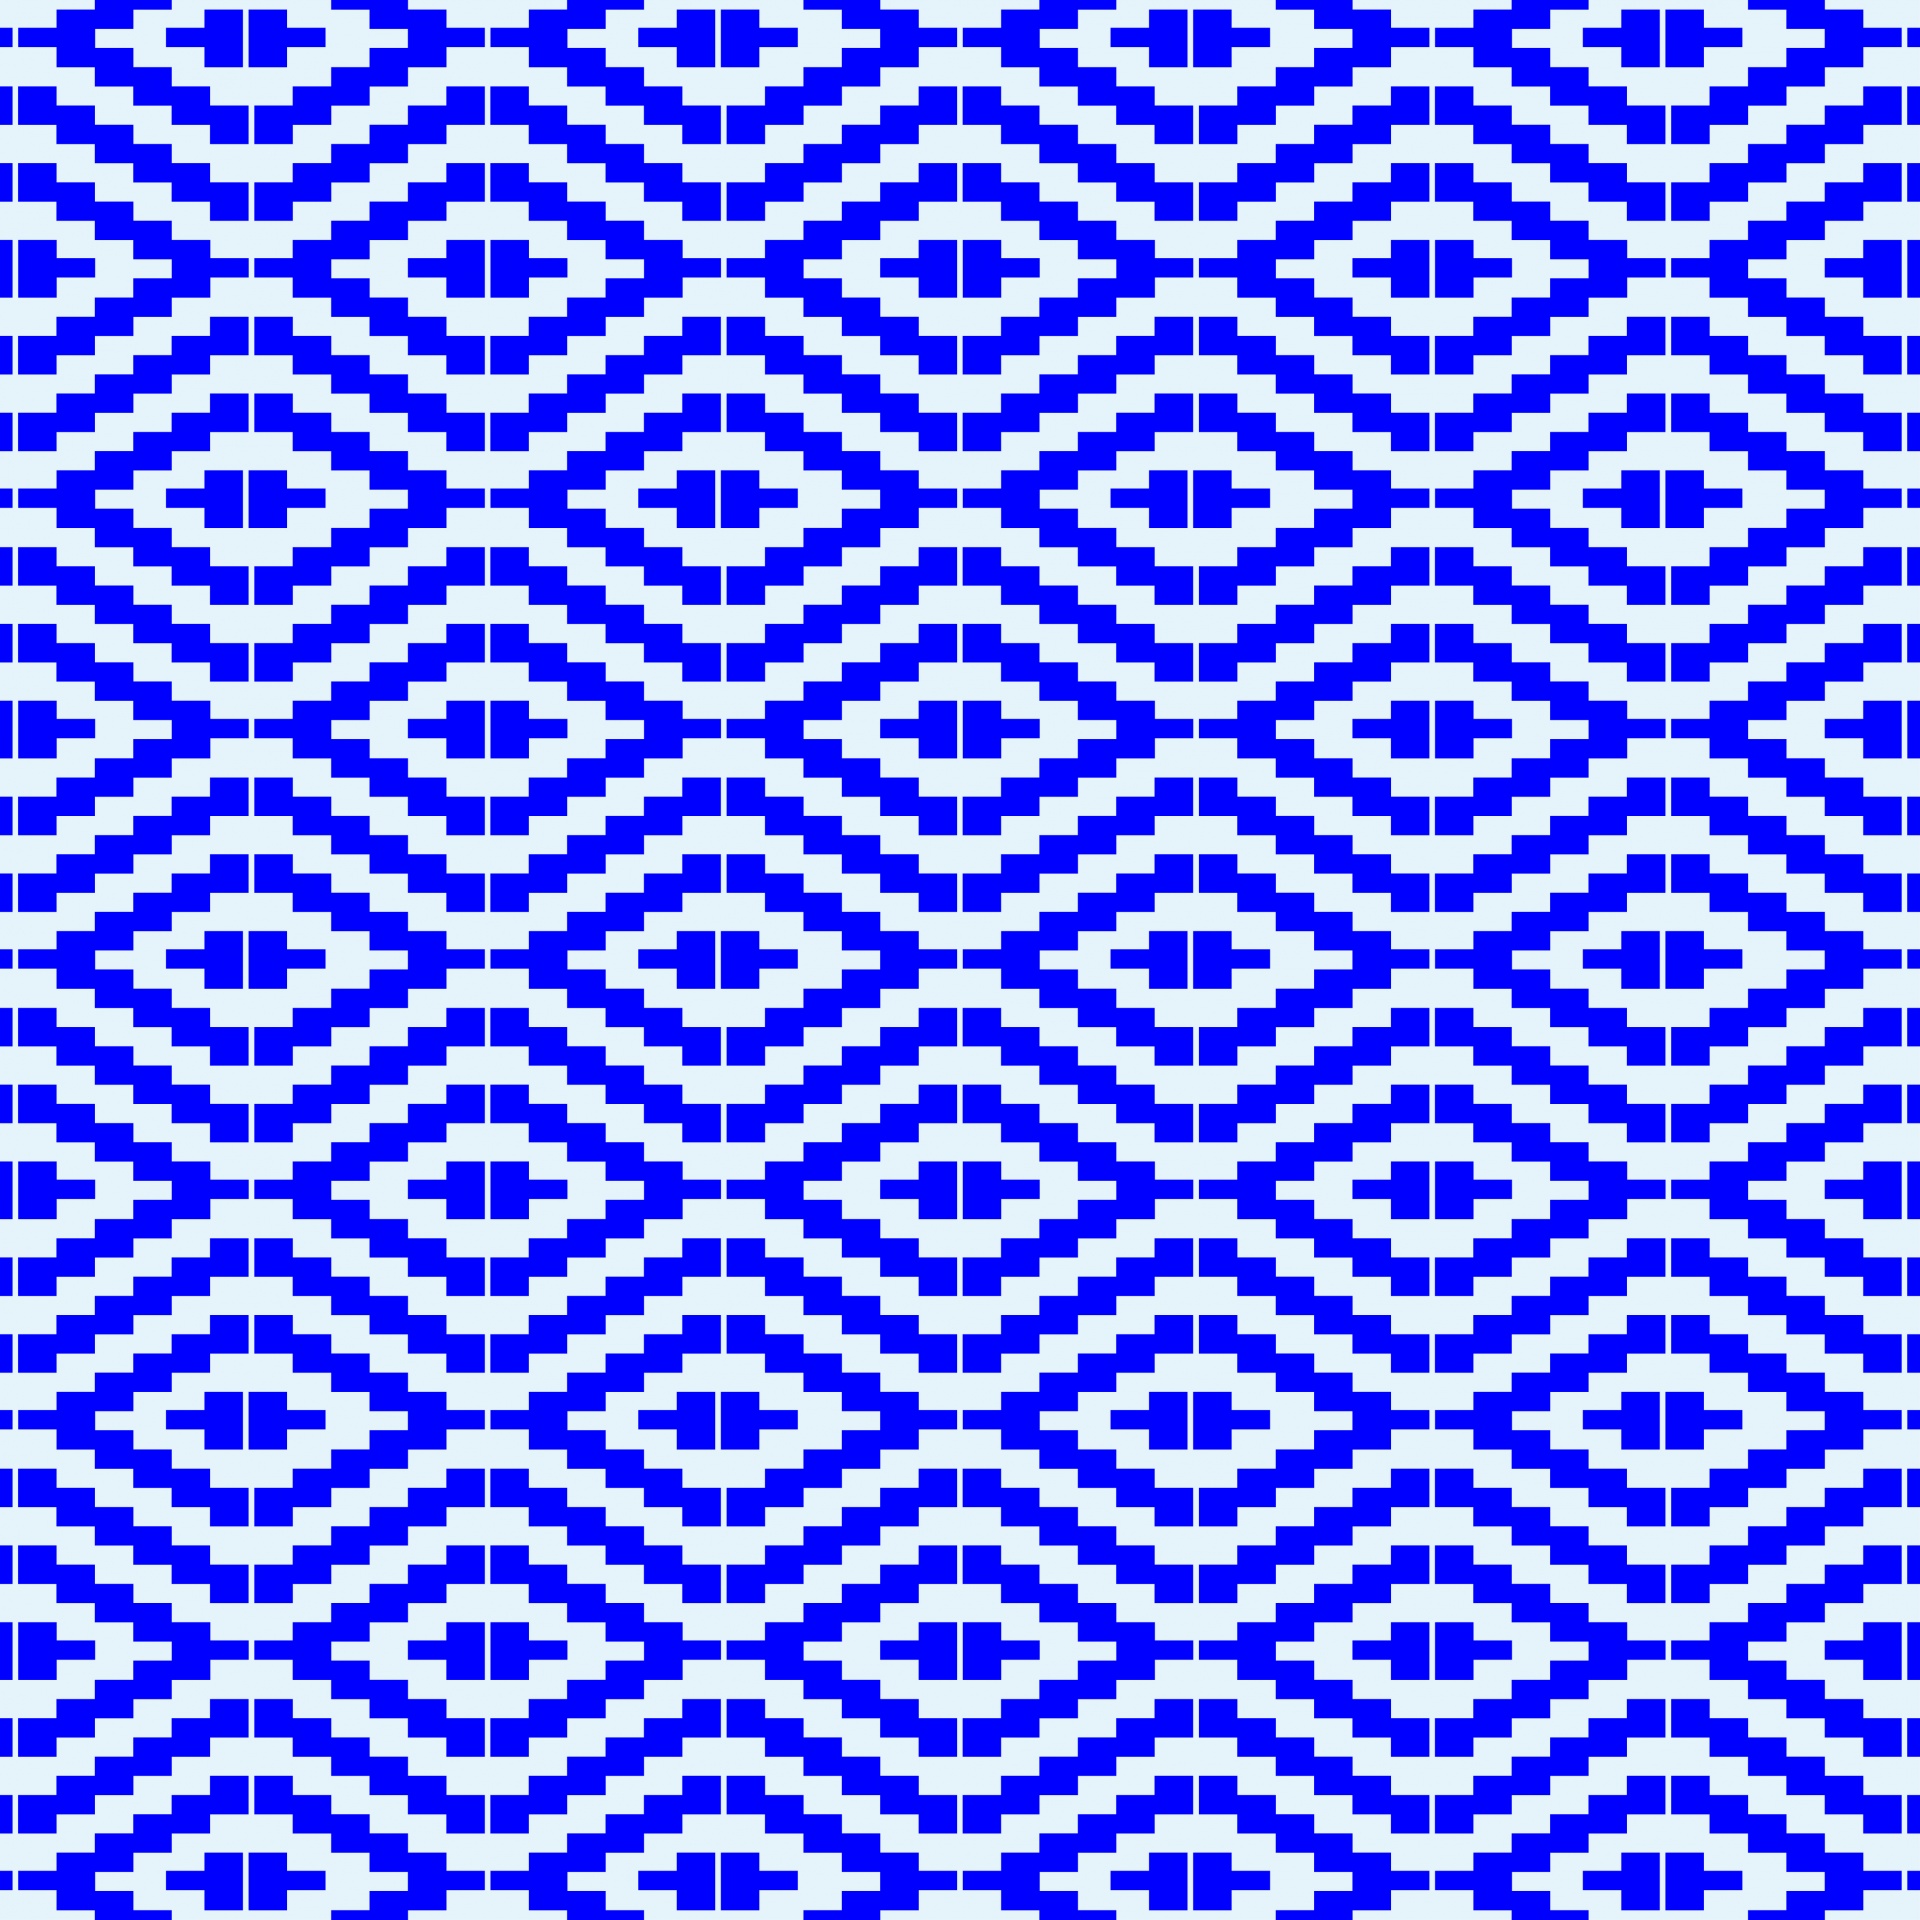 Geometric blue and white african tribal kente background pattern seamless